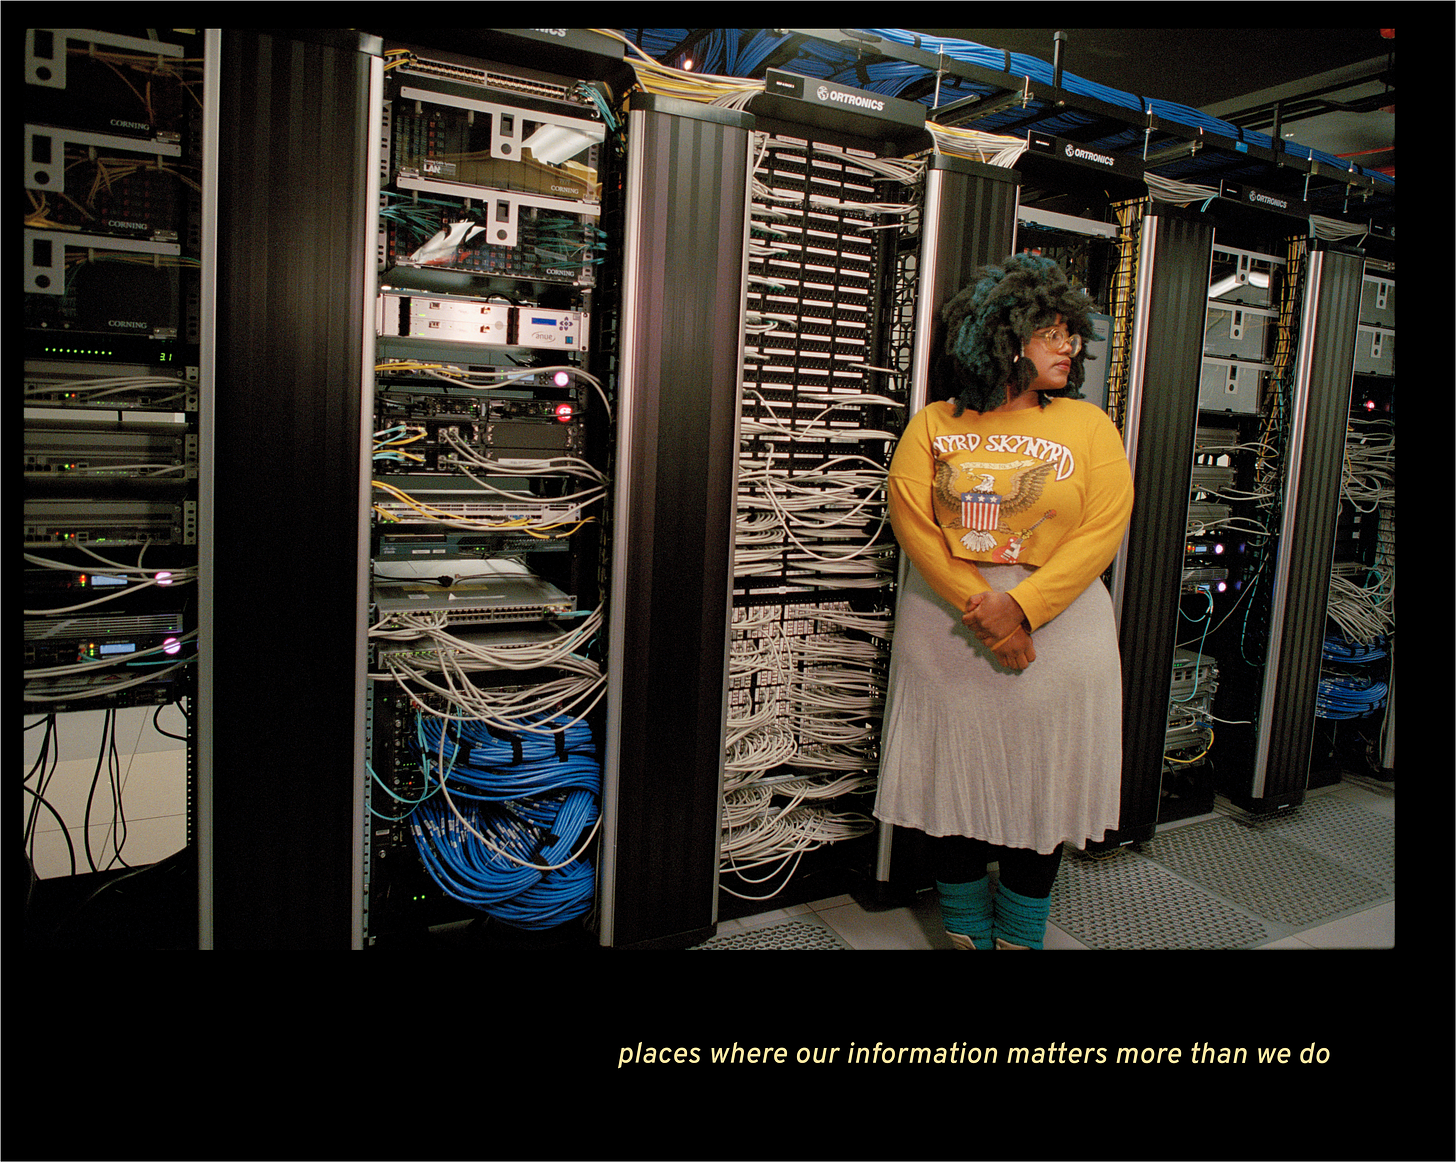 Image of a Black woman standing in front of a wall of computers, cables, and devices. She looks away from the camera.